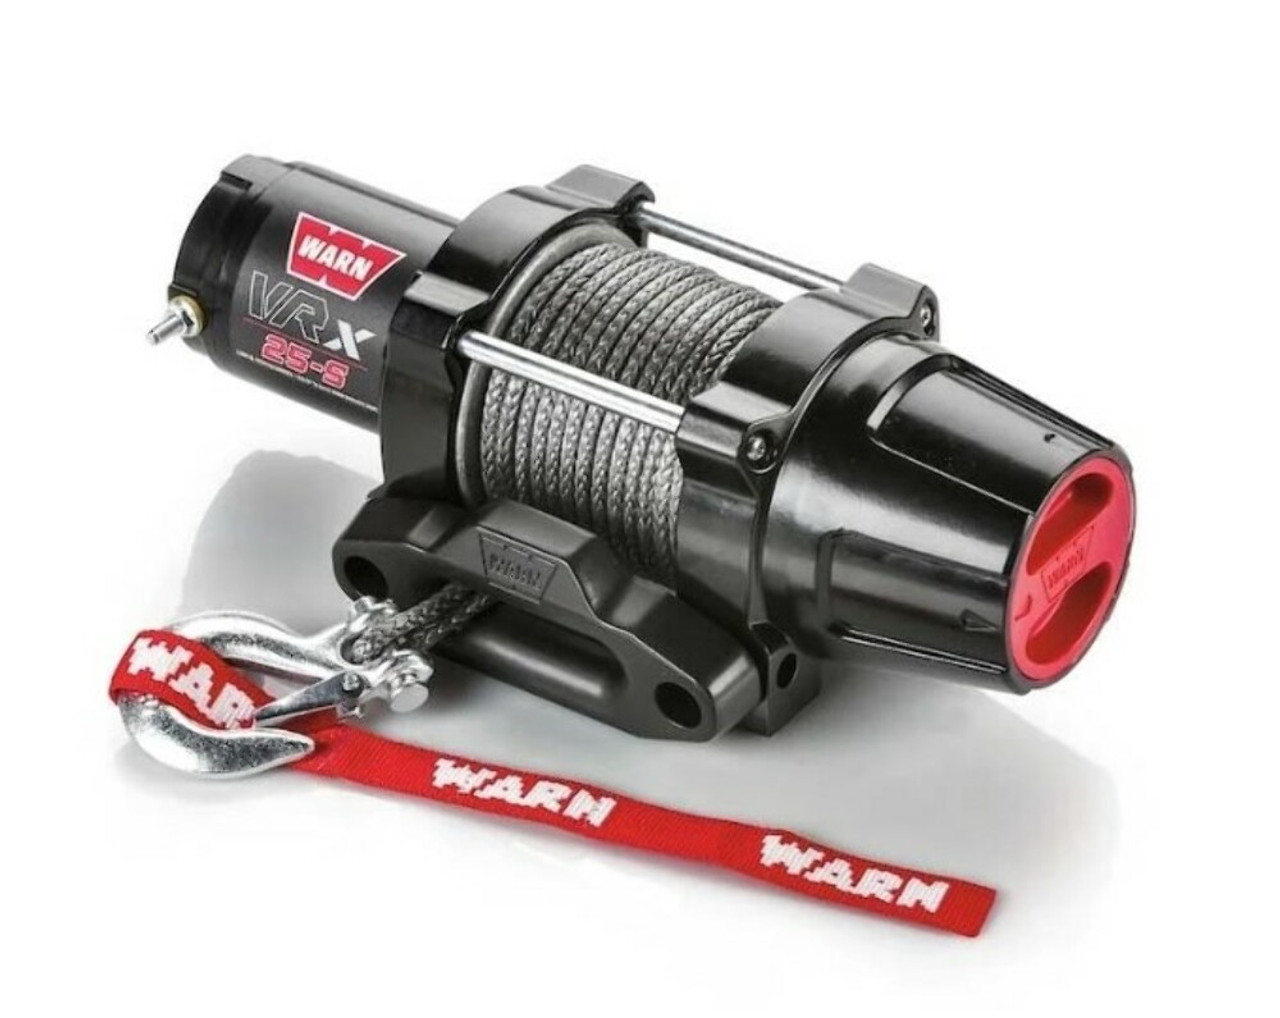 Warn 101020 VRX 25-S Powersport Winch 50' of 31/6" Synthetic Rope 2500 lbs